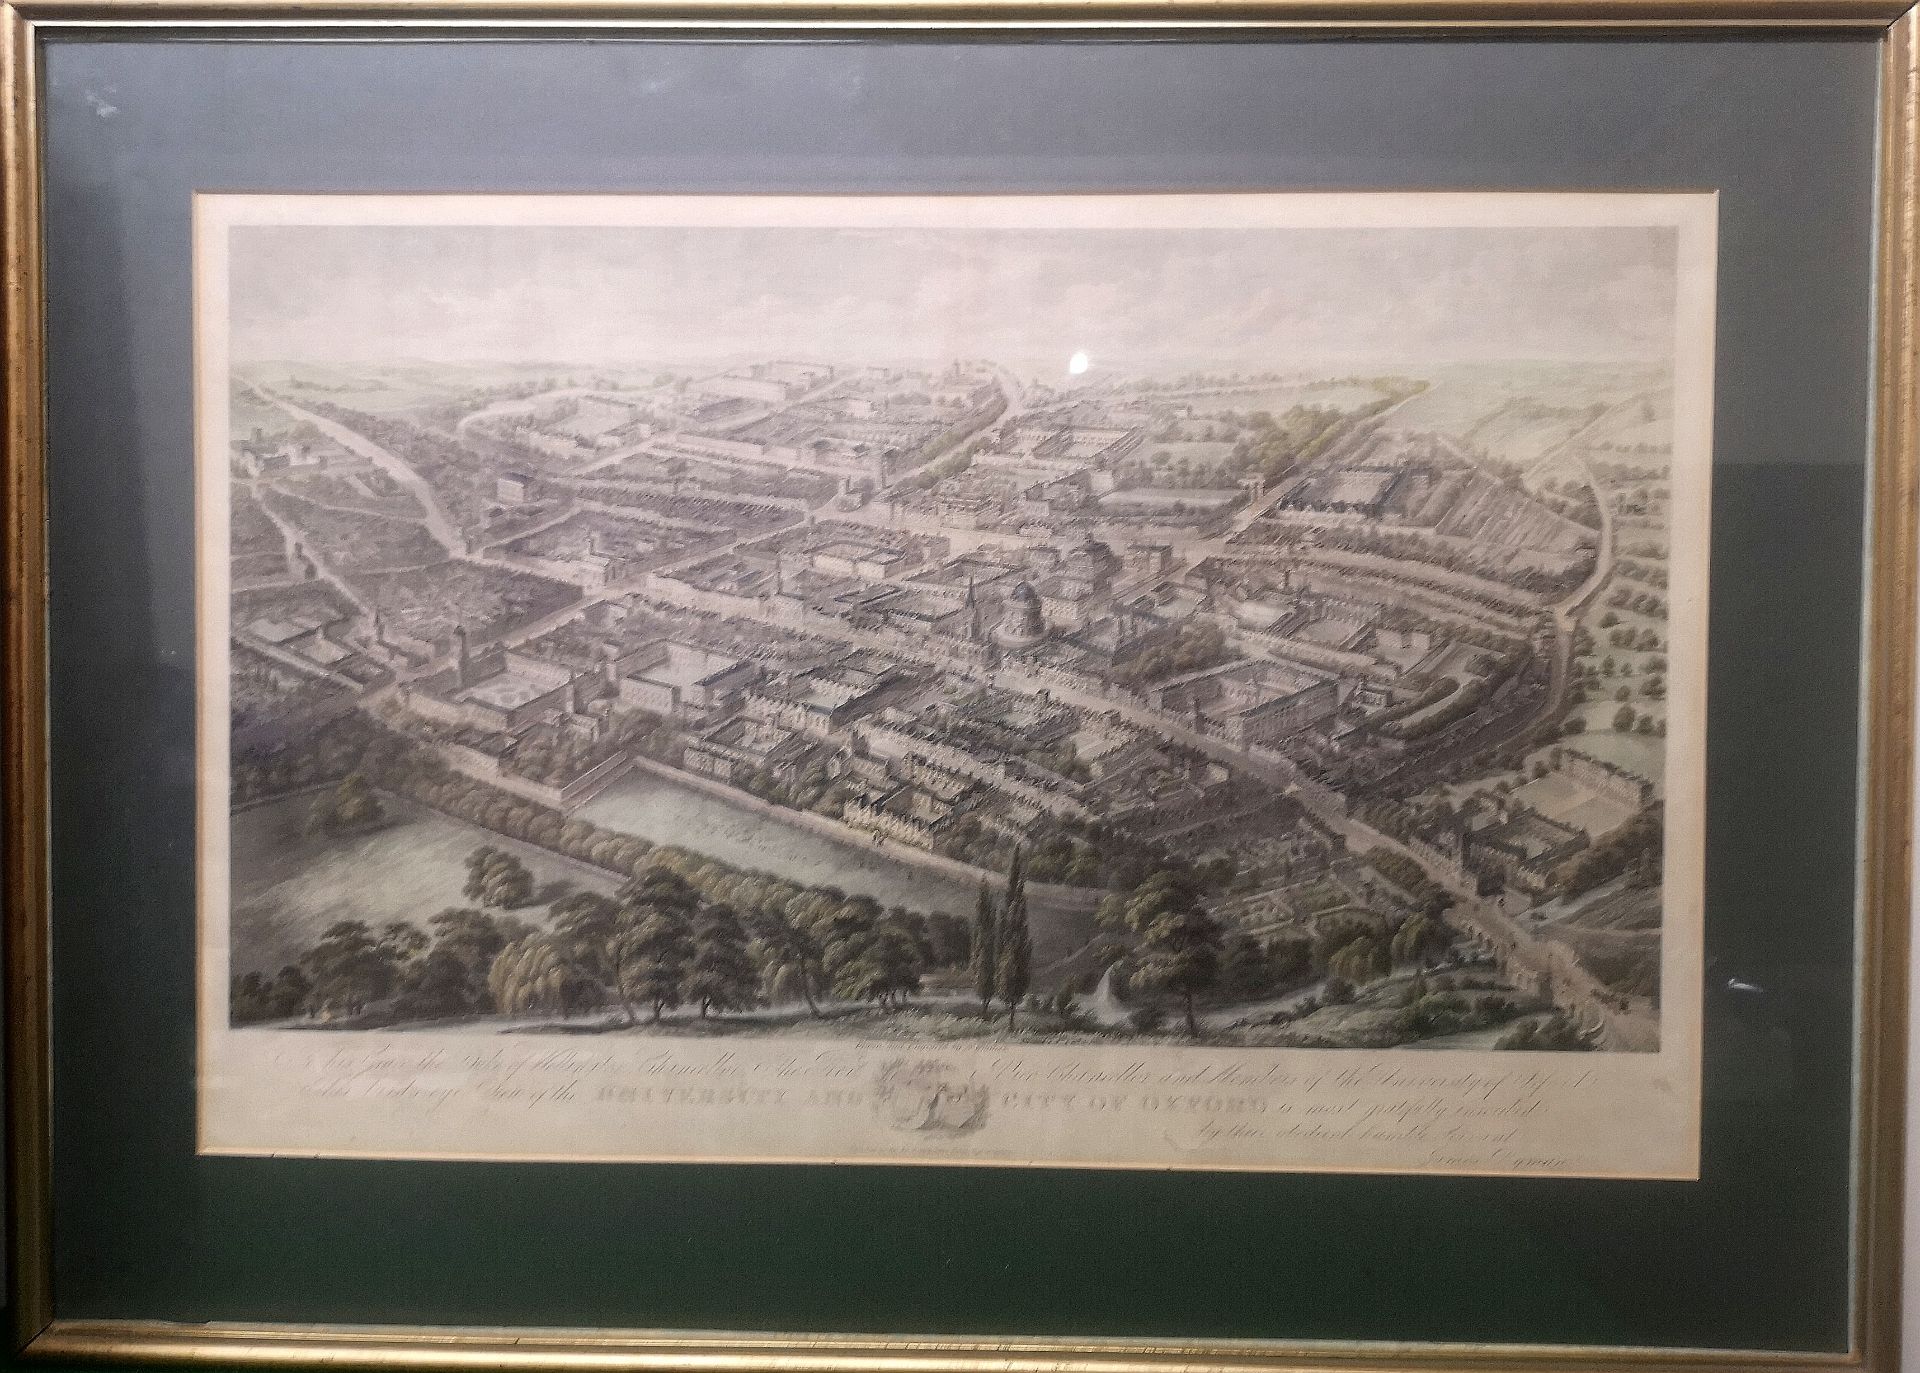 Framed and glazed print of the university city of Oxford